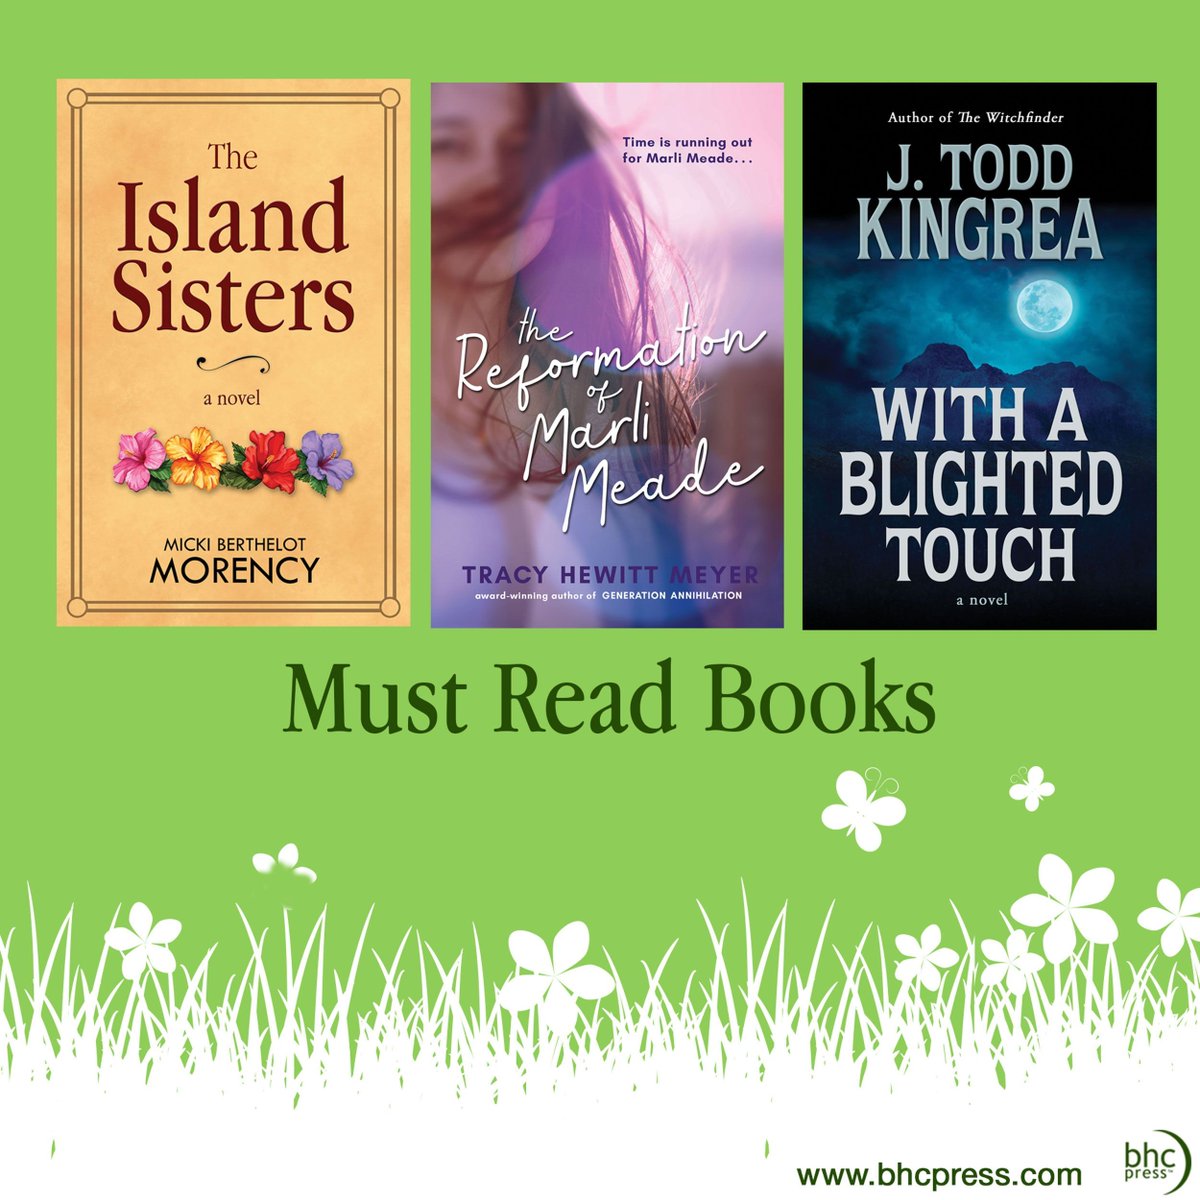 These #mustread books make the perfect spring and summer #weekendread. Available at all popular booksellers: buff.ly/4agjyrb @JToddKingrea @TracyHMeyer @mickimorency #bhcpress #fiction #teenfiction #horror #womensfiction